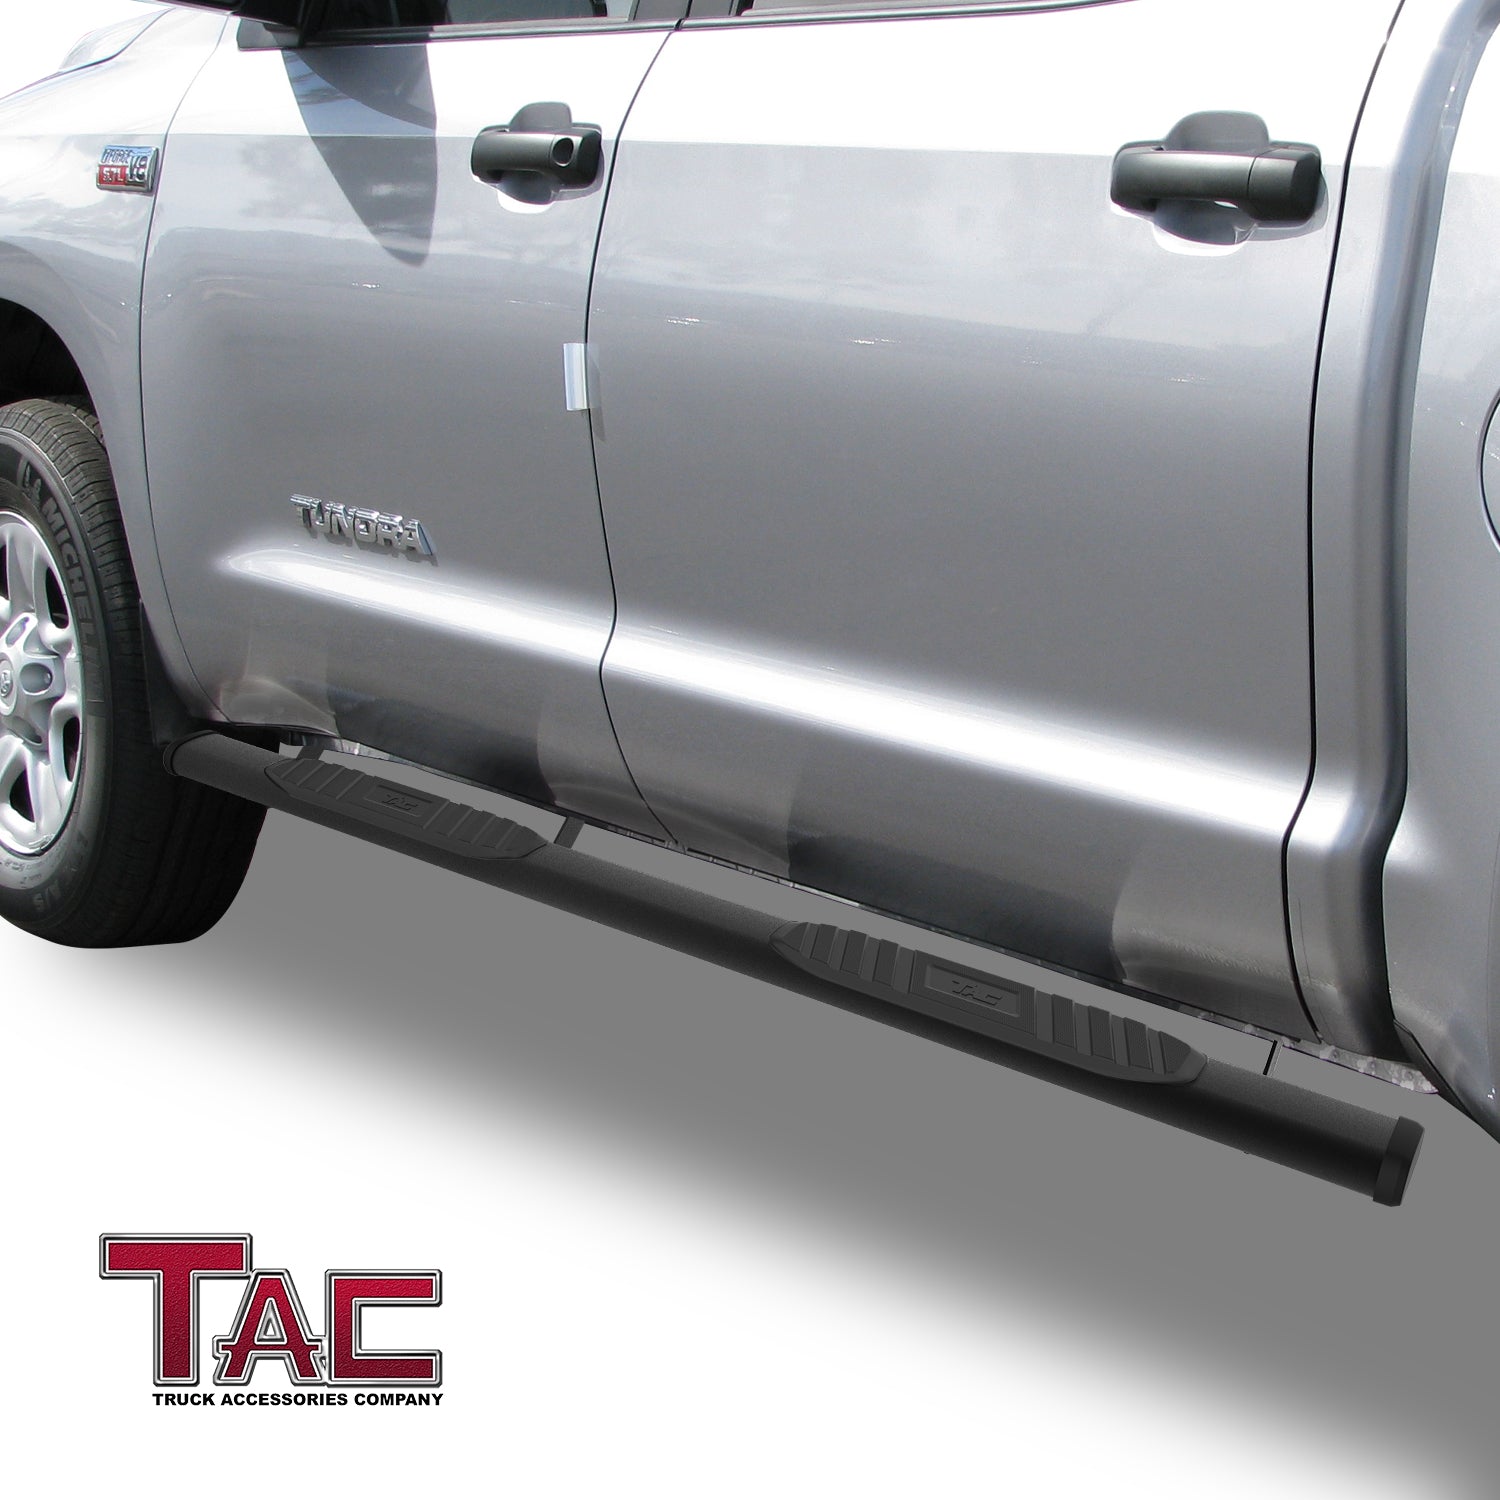 TAC Arrow Side Steps Running Boards Compatible with 2007-2021 Toyota Tundra CrewMax Truck Pickup 5” Aluminum Texture Black Step Rails Nerf Bars Lightweight Off Road Accessories 2Pcs - 0